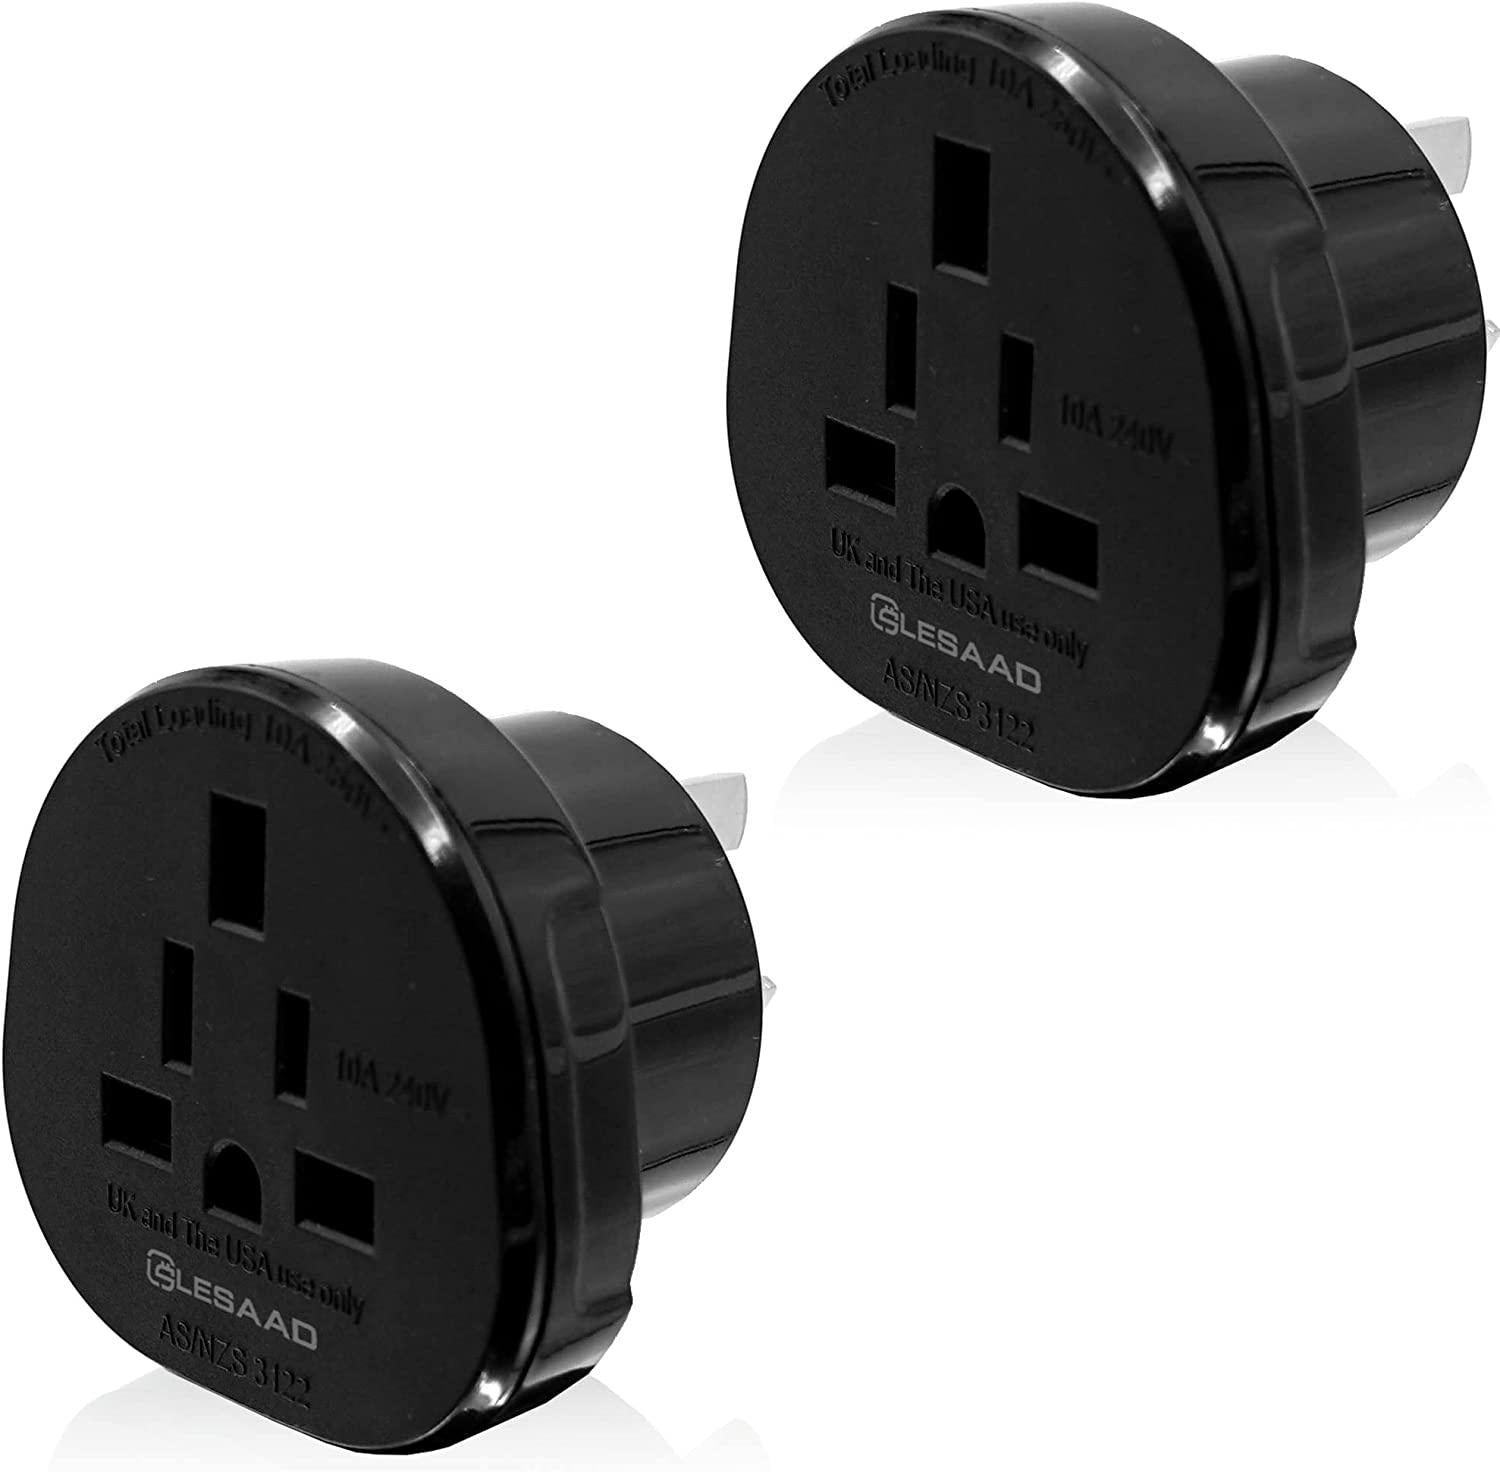 LESAAD, LESAAD SAA Approved Universal Travel Adapter(Pack of 2) with Safety Grounded 3-pin Power Plug, International adapters for UK, US, JP, CA to AU, NZ and China.